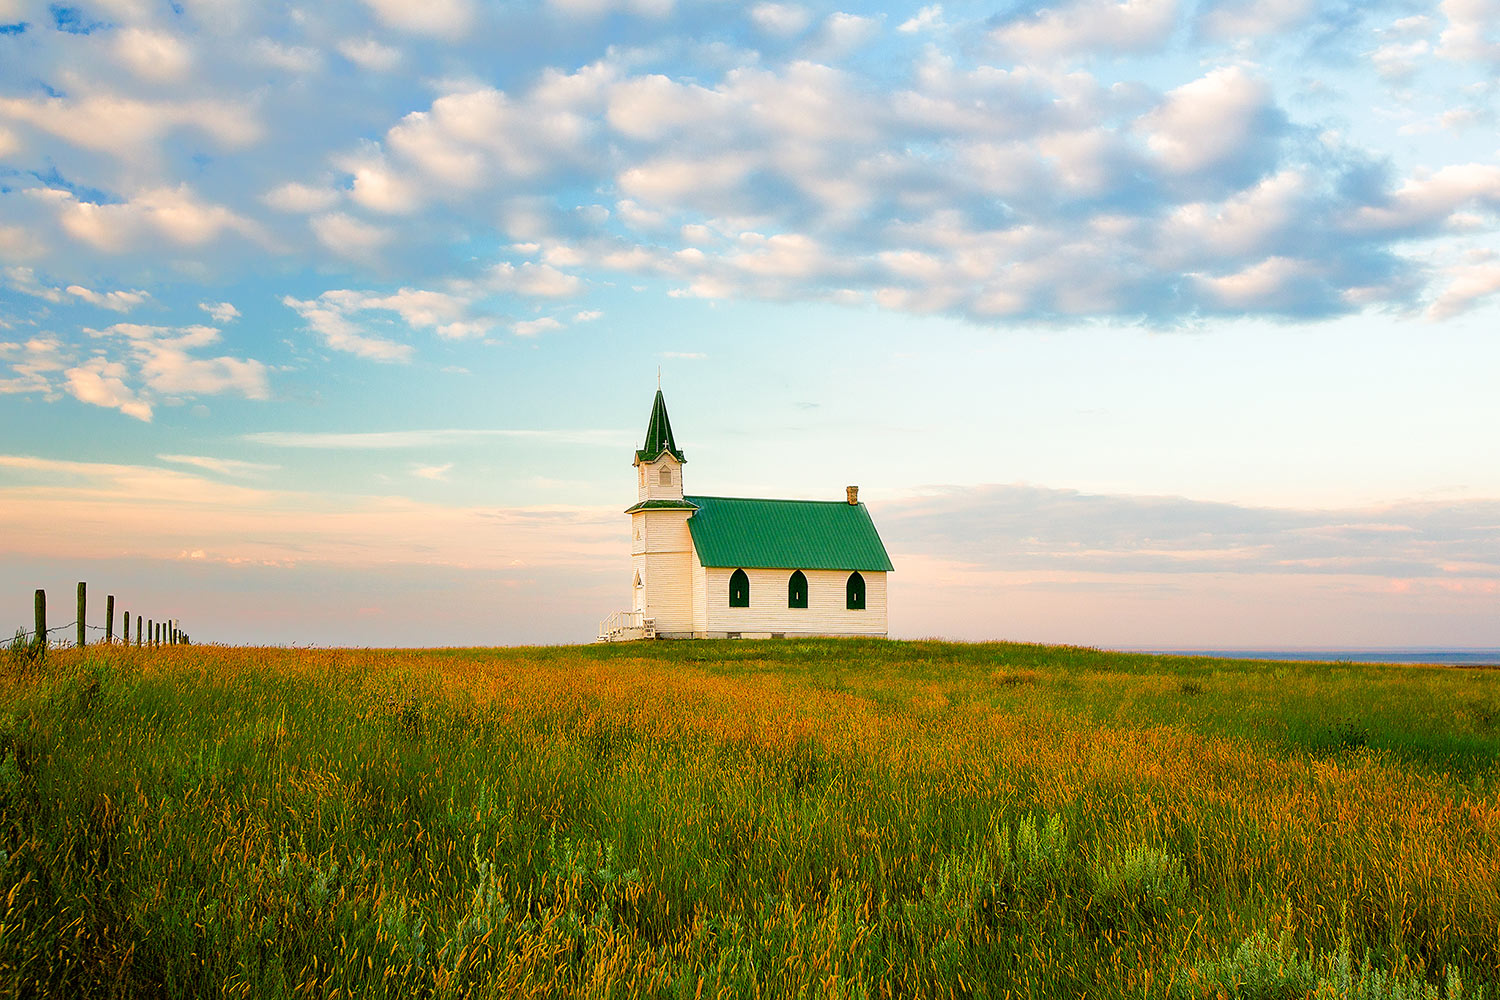 Things I like about Montana: &nbsp;Lonely churches and schools surrounded by nothing but Montana's plains.&nbsp;→ Buy a Print